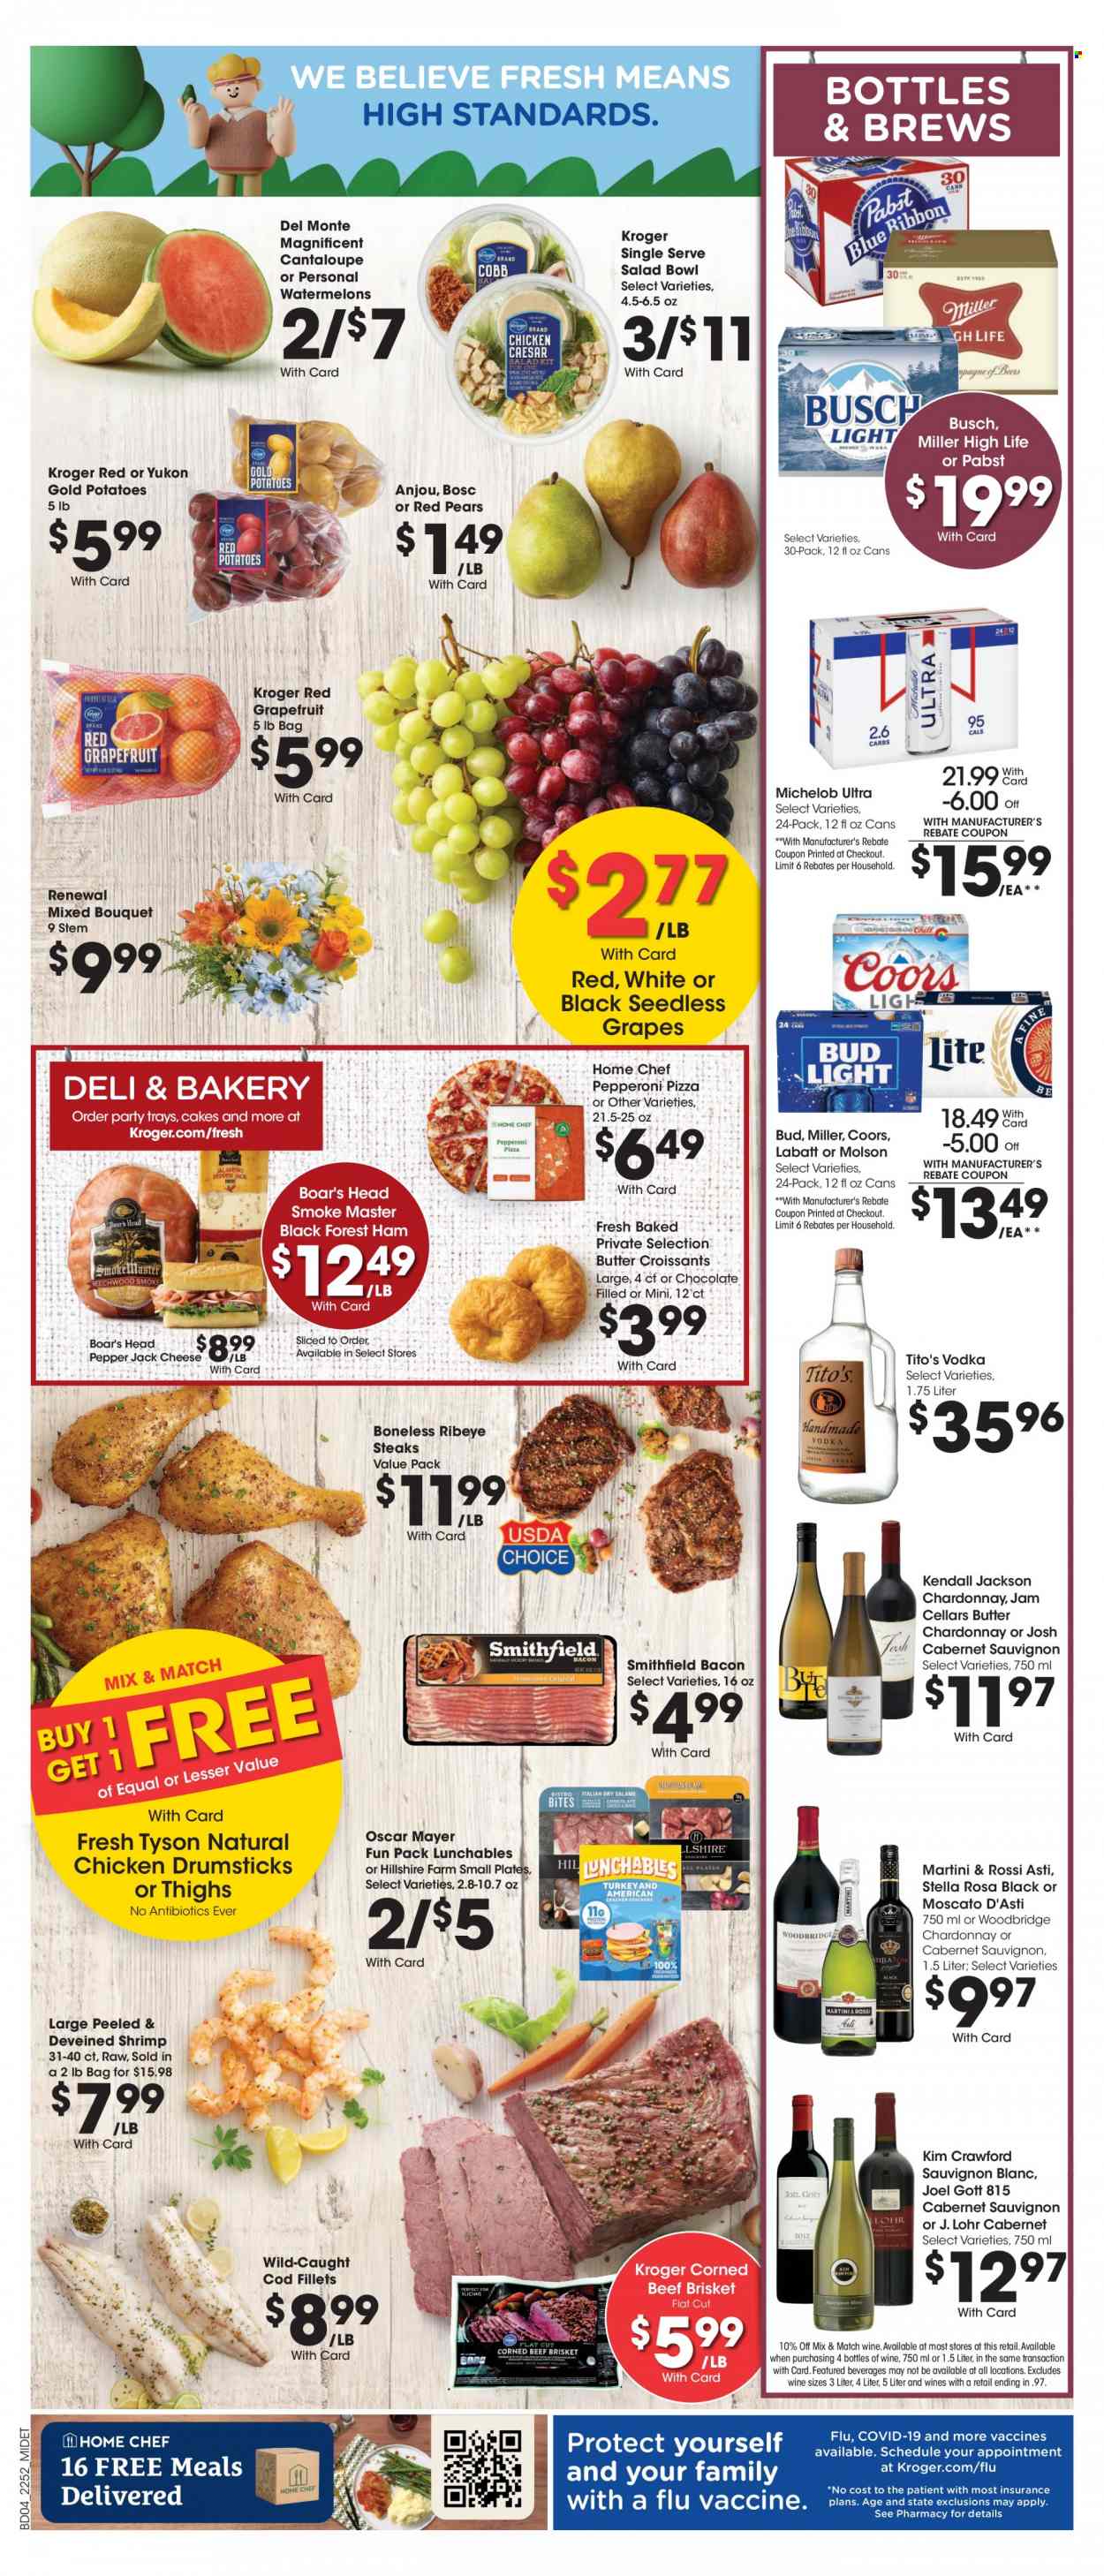 thumbnail - Kroger Flyer - 01/25/2023 - 01/31/2023 - Sales products - cake, croissant, cantaloupe, potatoes, red potatoes, grapefruits, grapes, seedless grapes, pears, cod, shrimps, pizza, Lunchables, bacon, ham, Hillshire Farm, Oscar Mayer, pepperoni, corned beef, Pepper Jack cheese, Del Monte, Cabernet Sauvignon, red wine, white wine, Chardonnay, wine, Moscato, Sauvignon Blanc, Woodbridge, vodka, Martini, beer, Busch, Bud Light, Miller, Pabst Blue Ribbon, chicken drumsticks, beef meat, steak, ribeye steak, beef brisket, plate, salad bowl, bowl, bouquet, Coors, Michelob. Page 5.